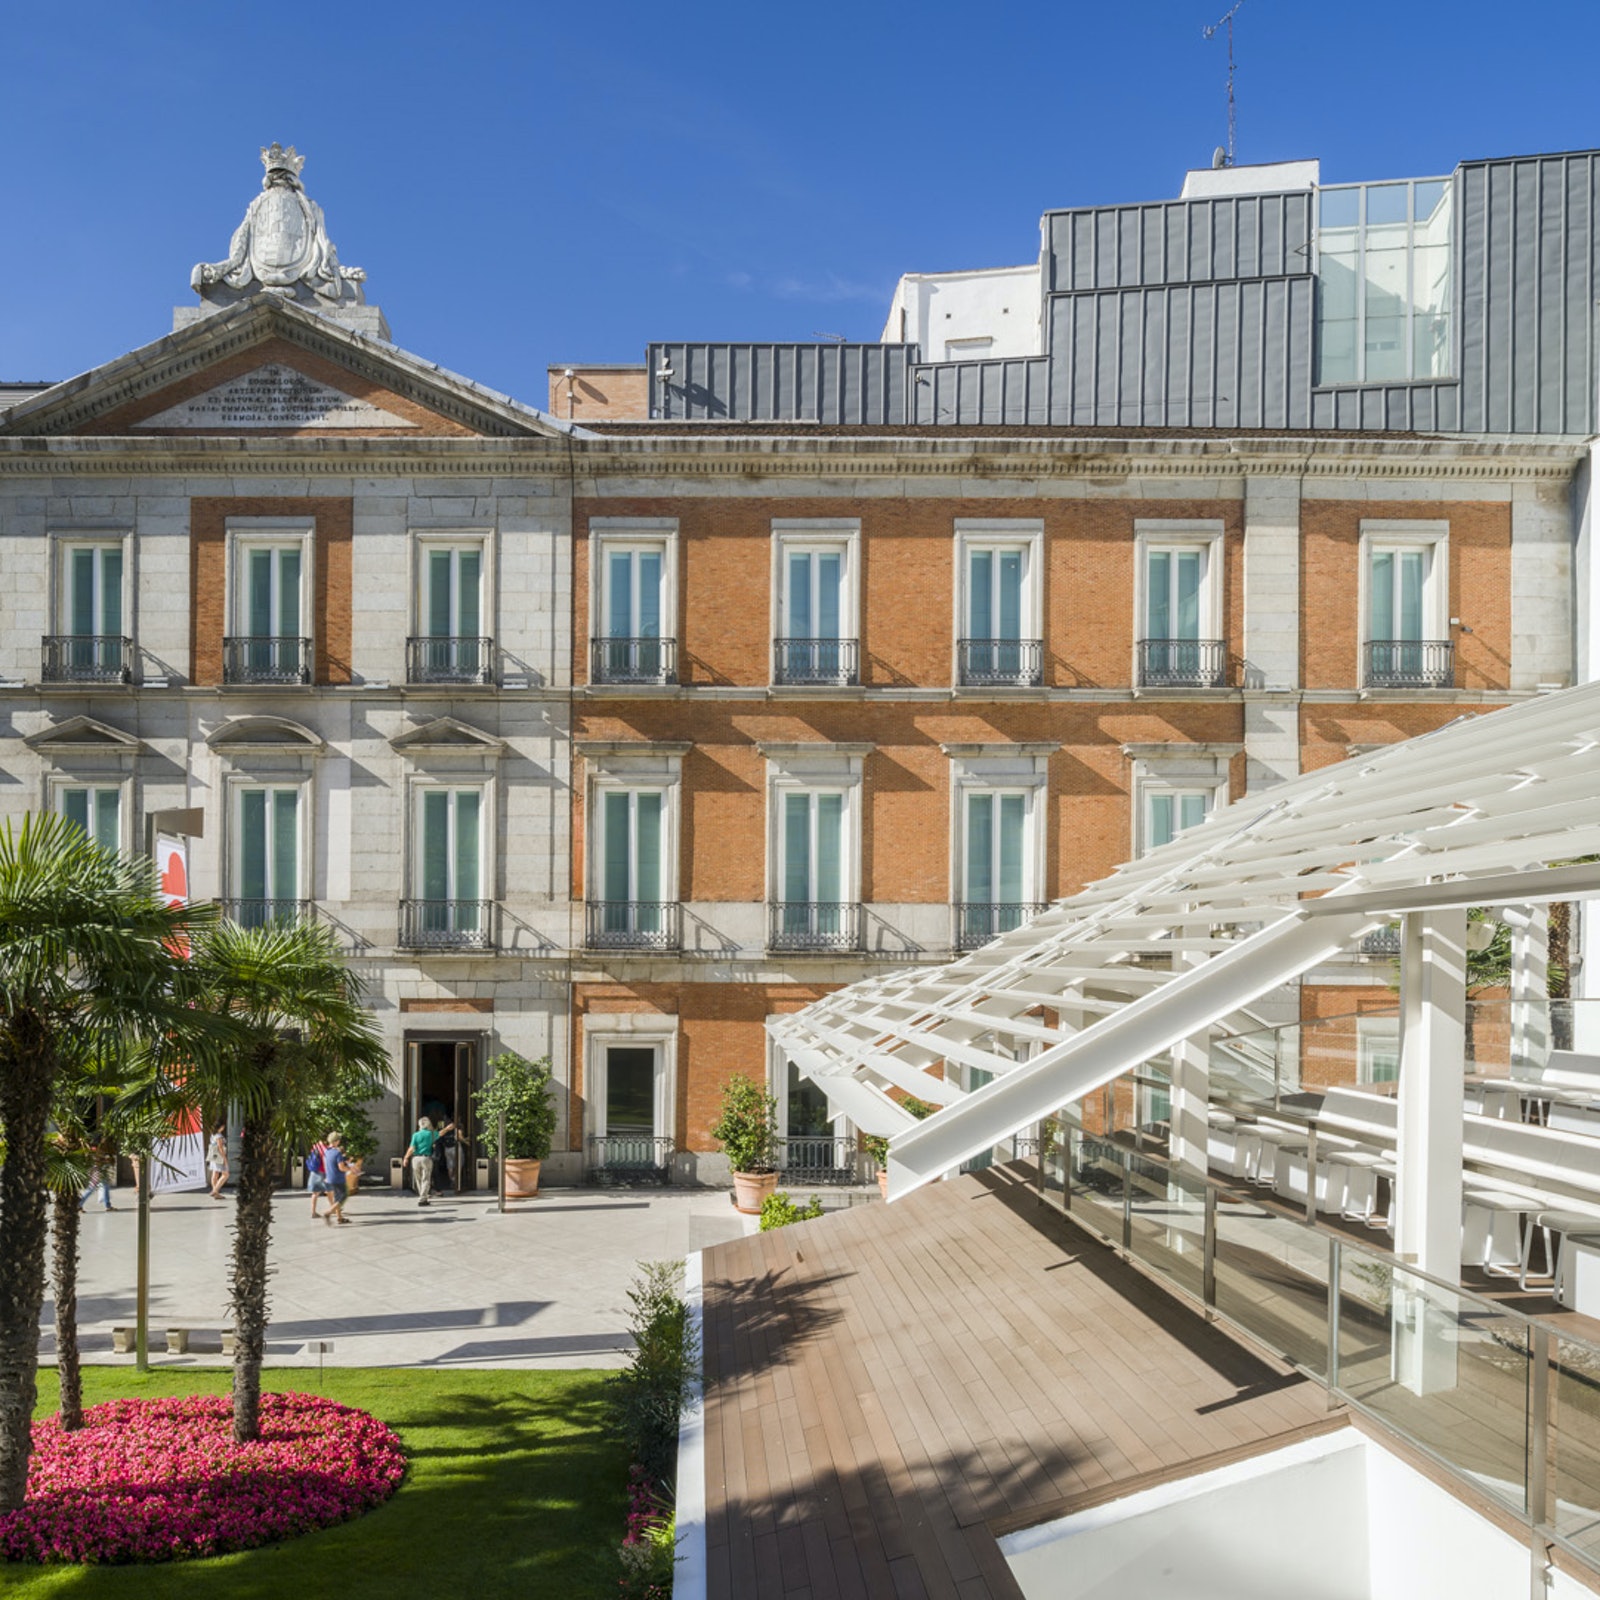 Thyssen-Bornemisza National Museum with Themed Audio Tours in Spain